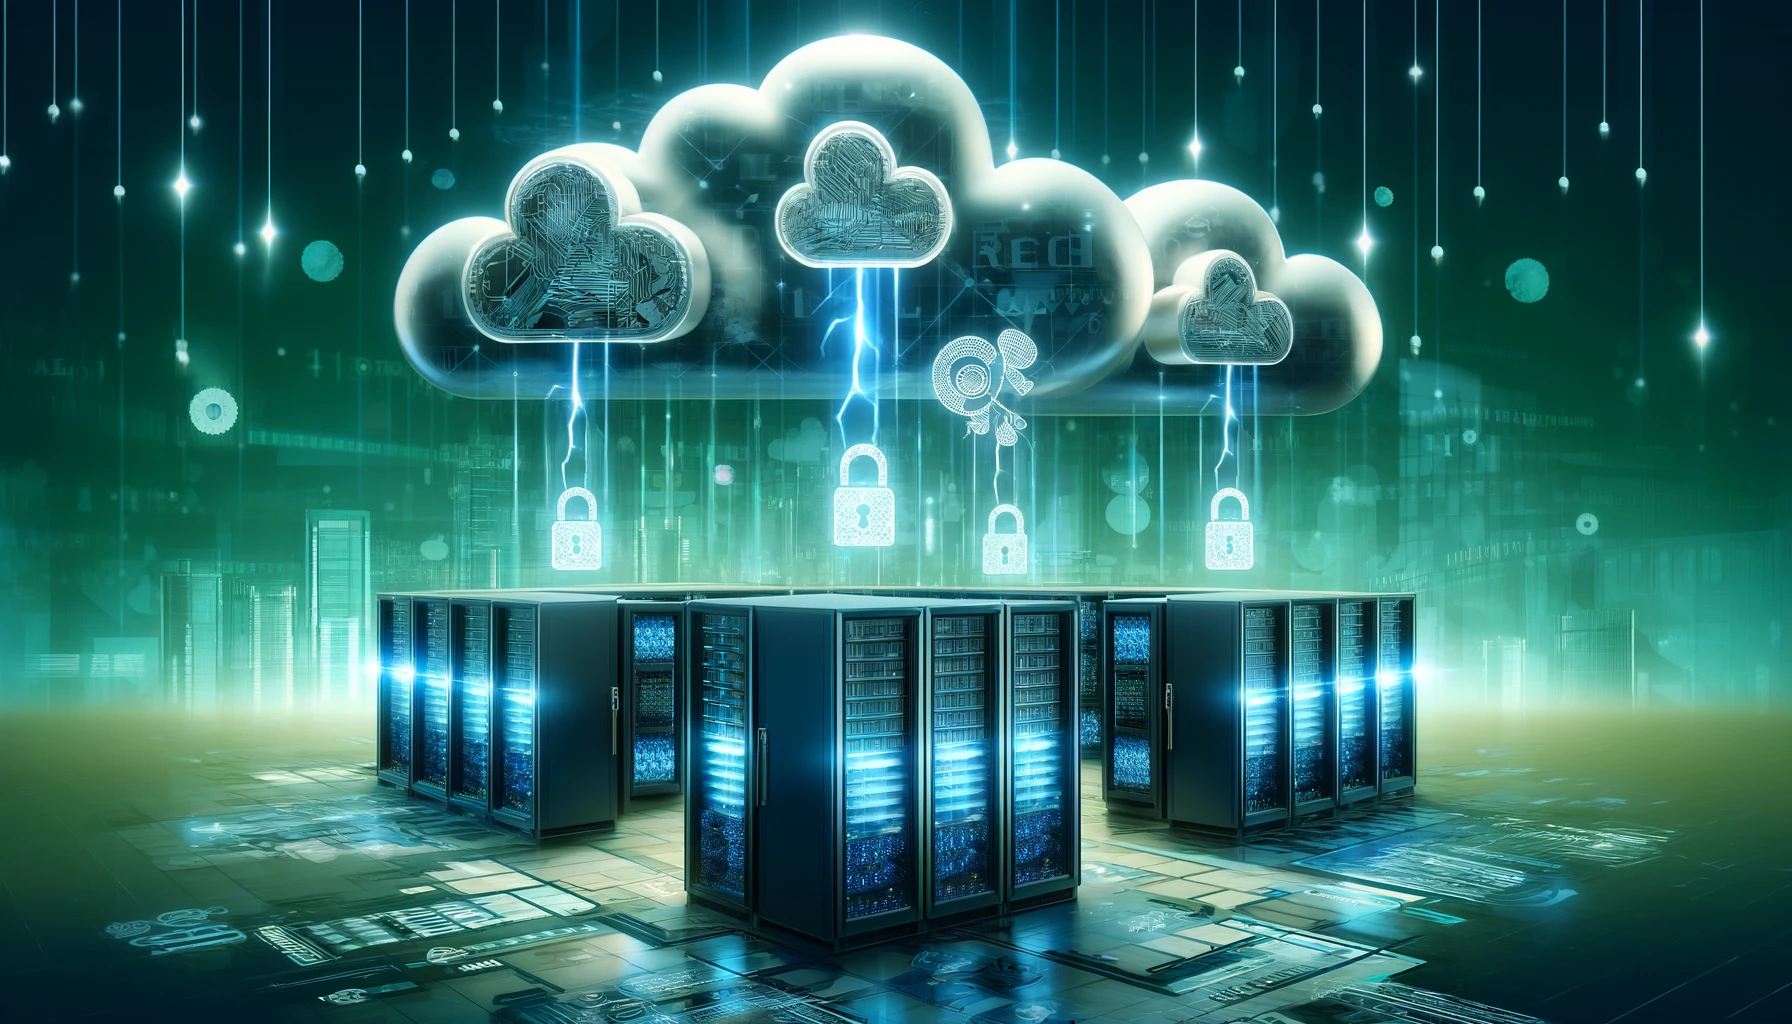 A group of servers surrounded by clouds and padlocks.